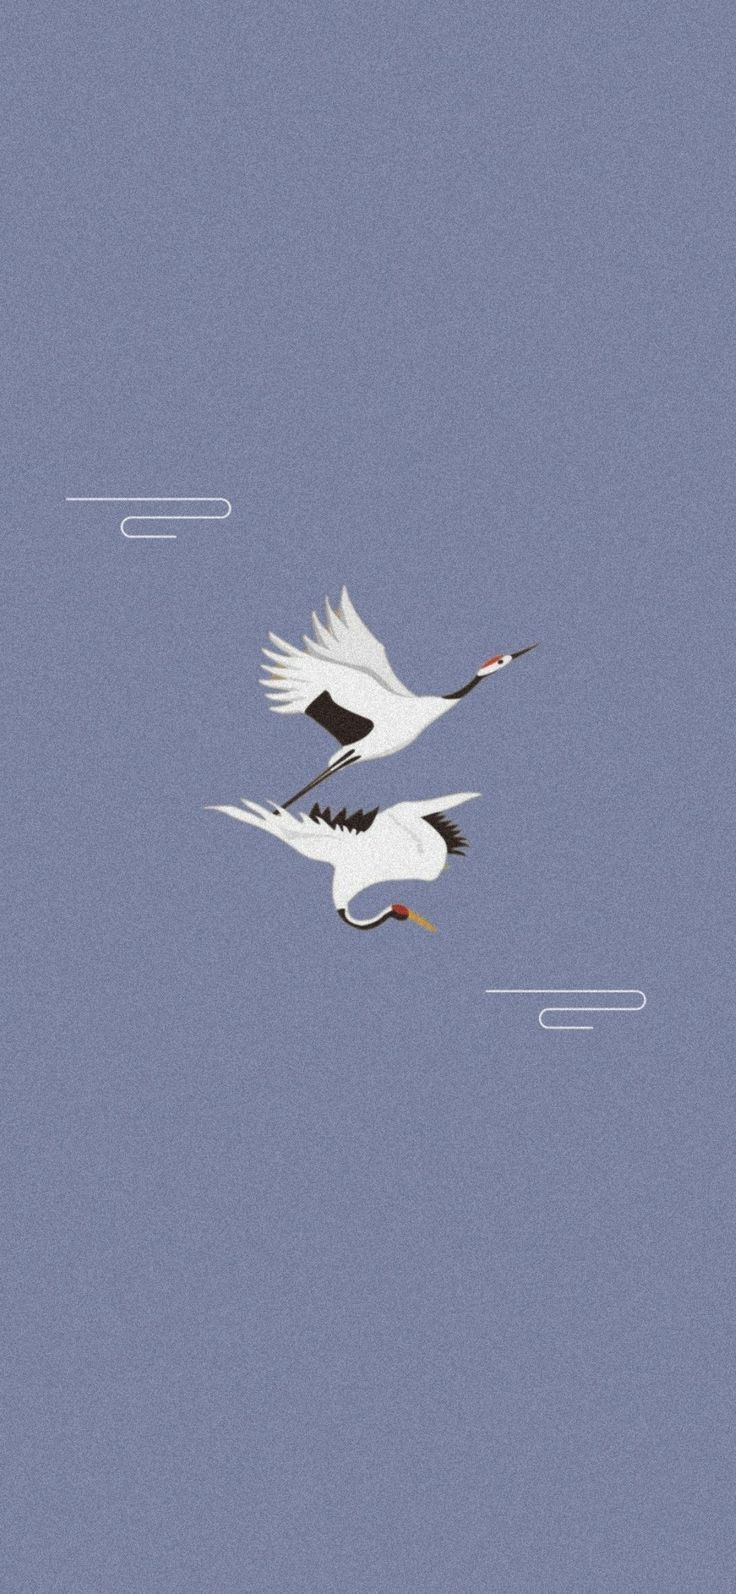 A pair of white cranes flying in the sky - 